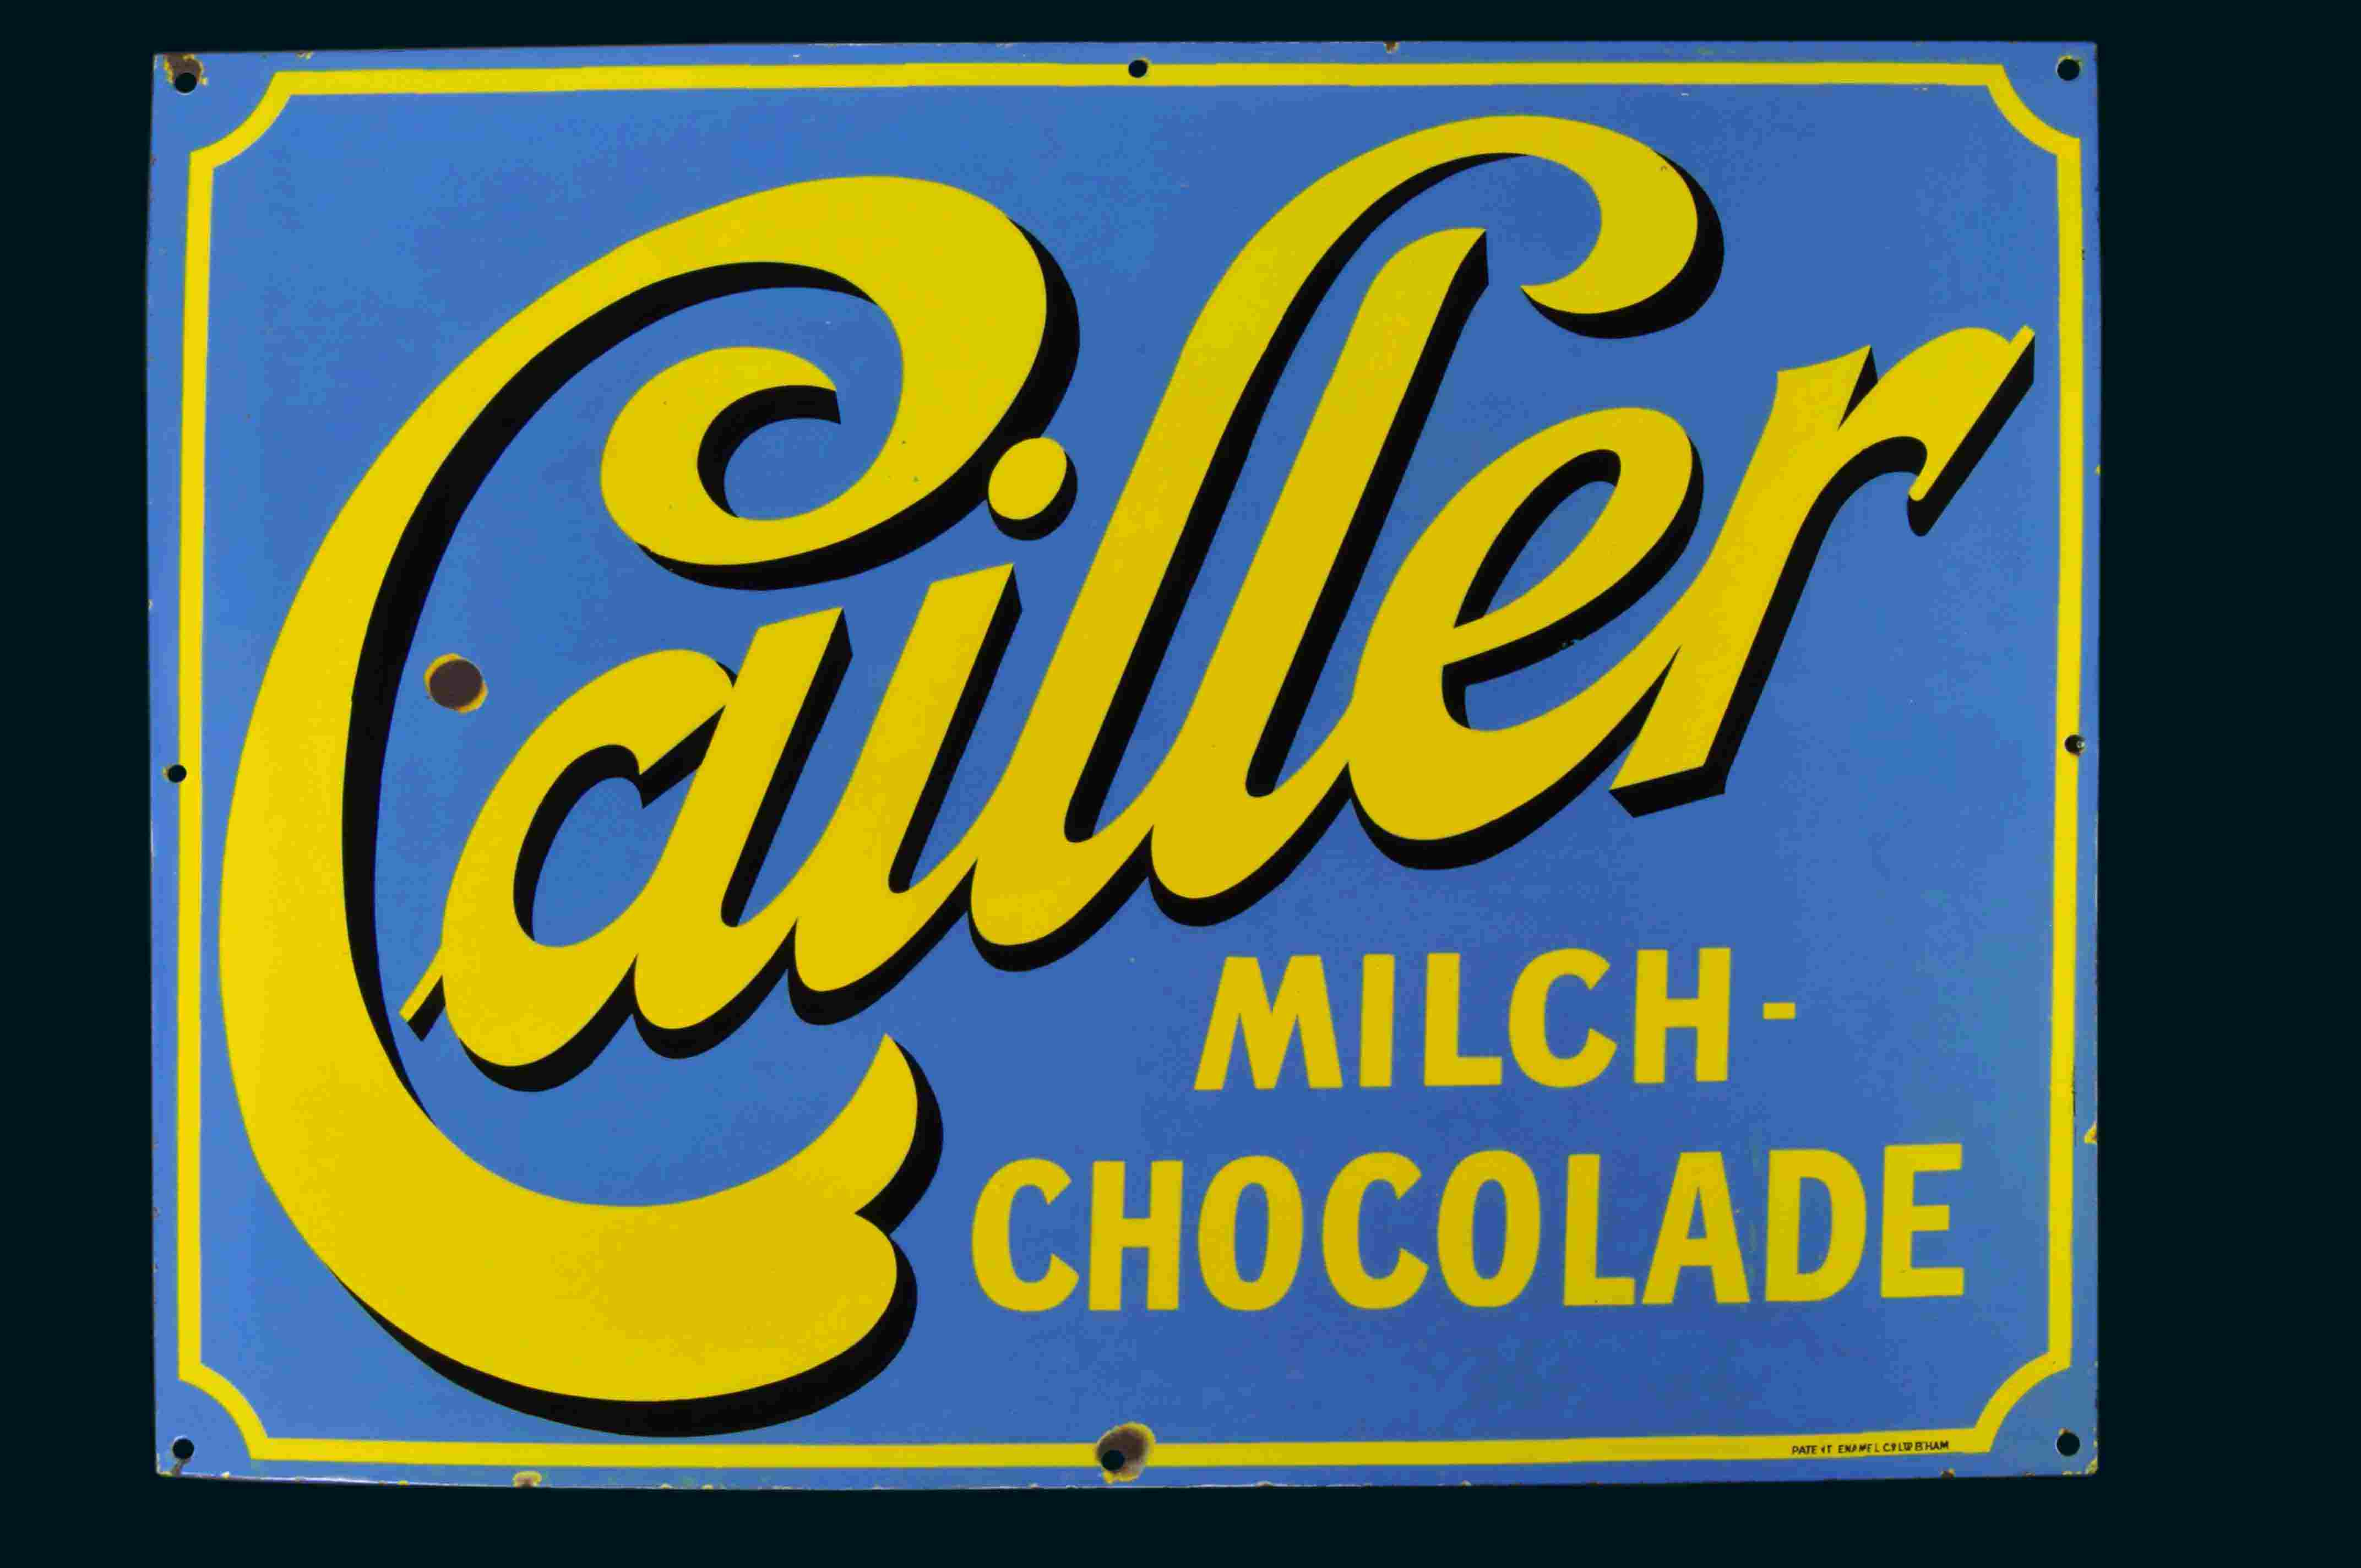 Cailler Milch-Chocolade 